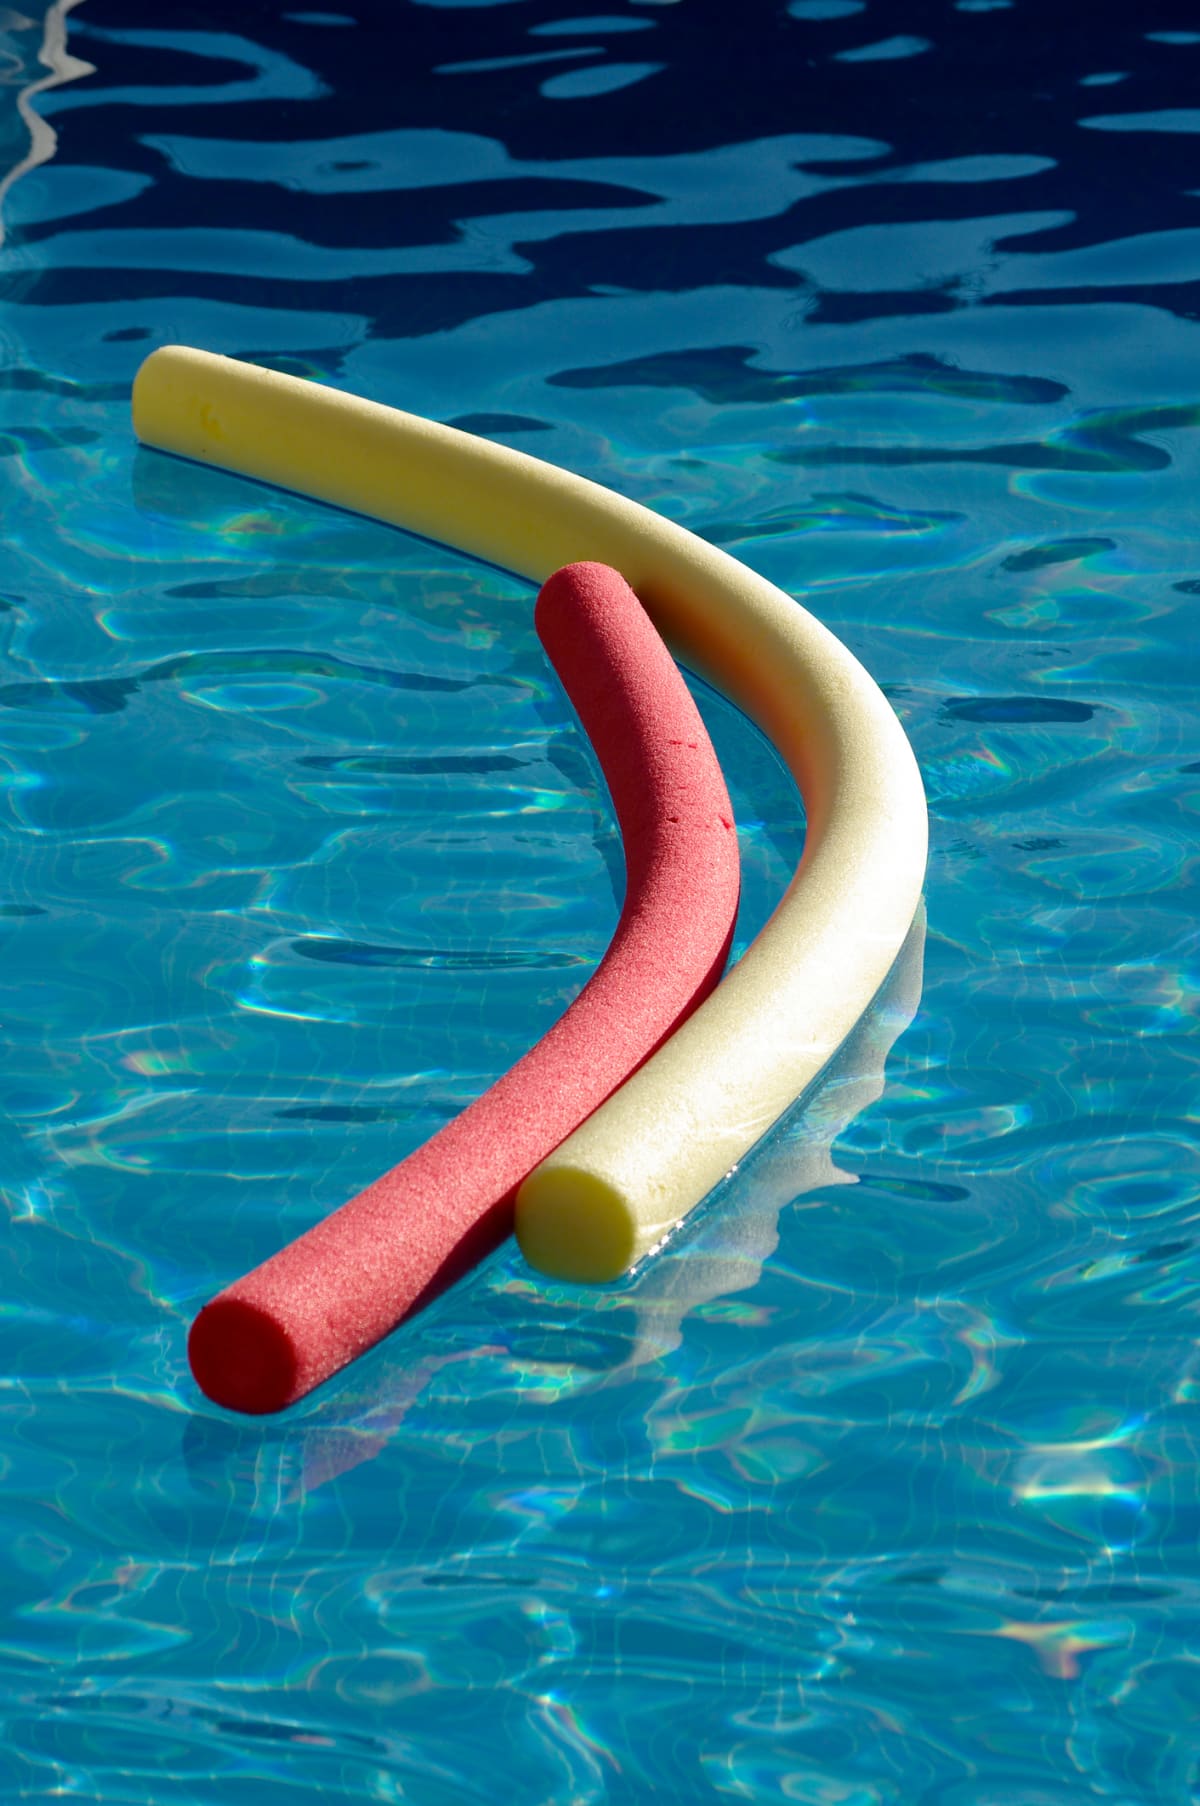 Pool noodles floating in swimming pool